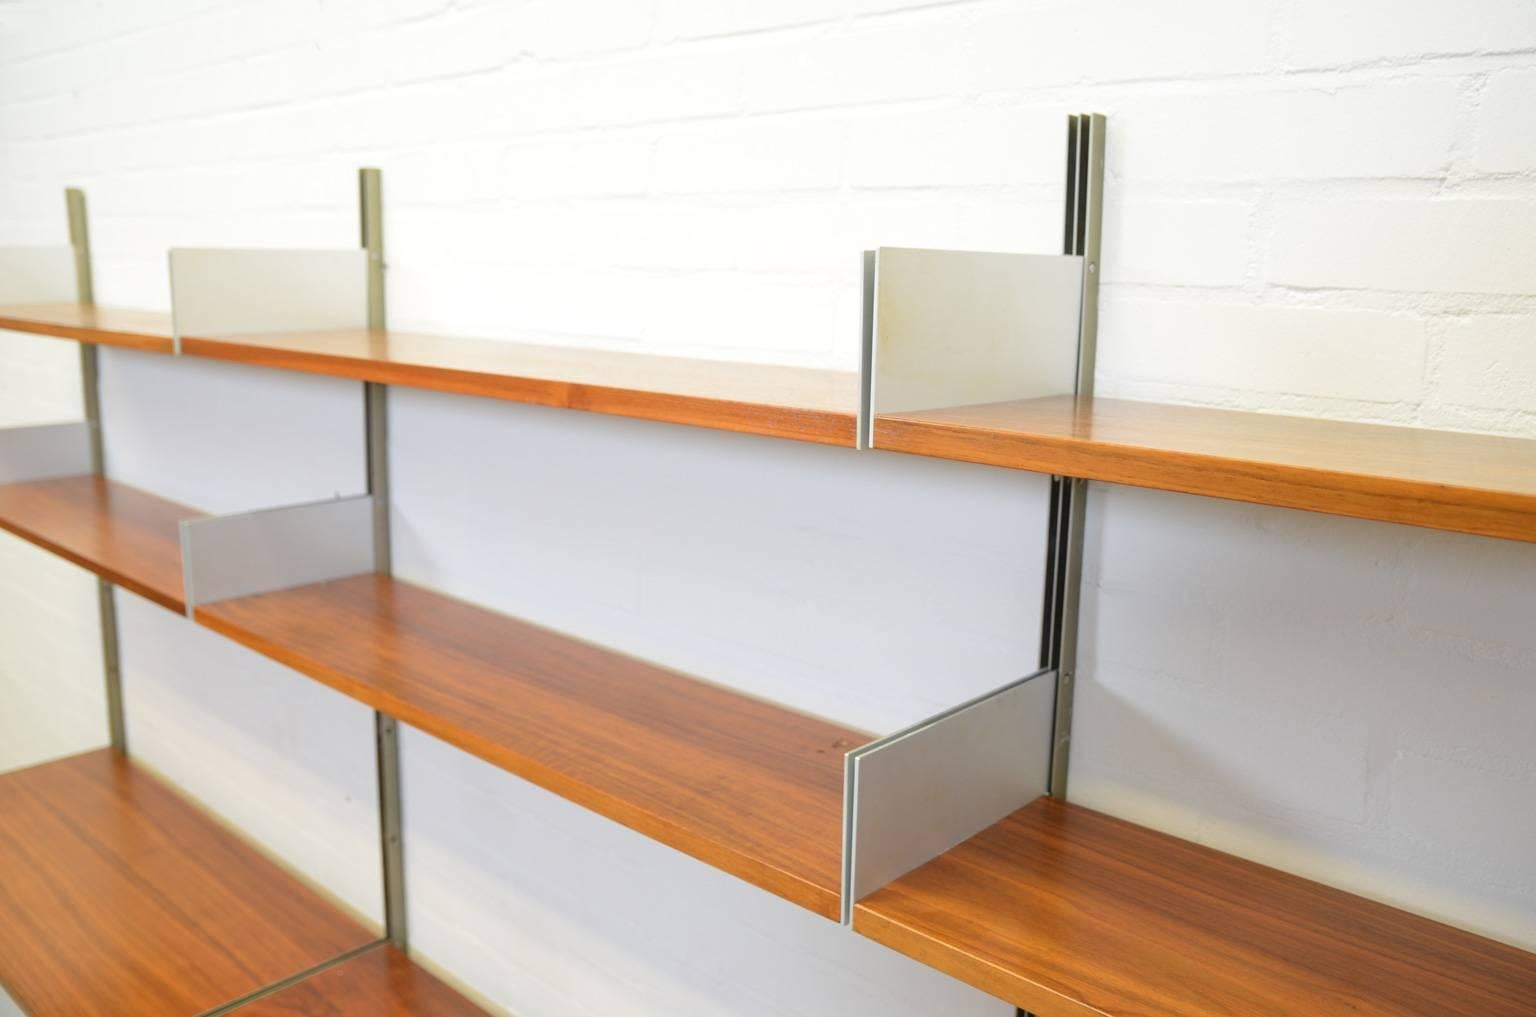 606 shelving system price